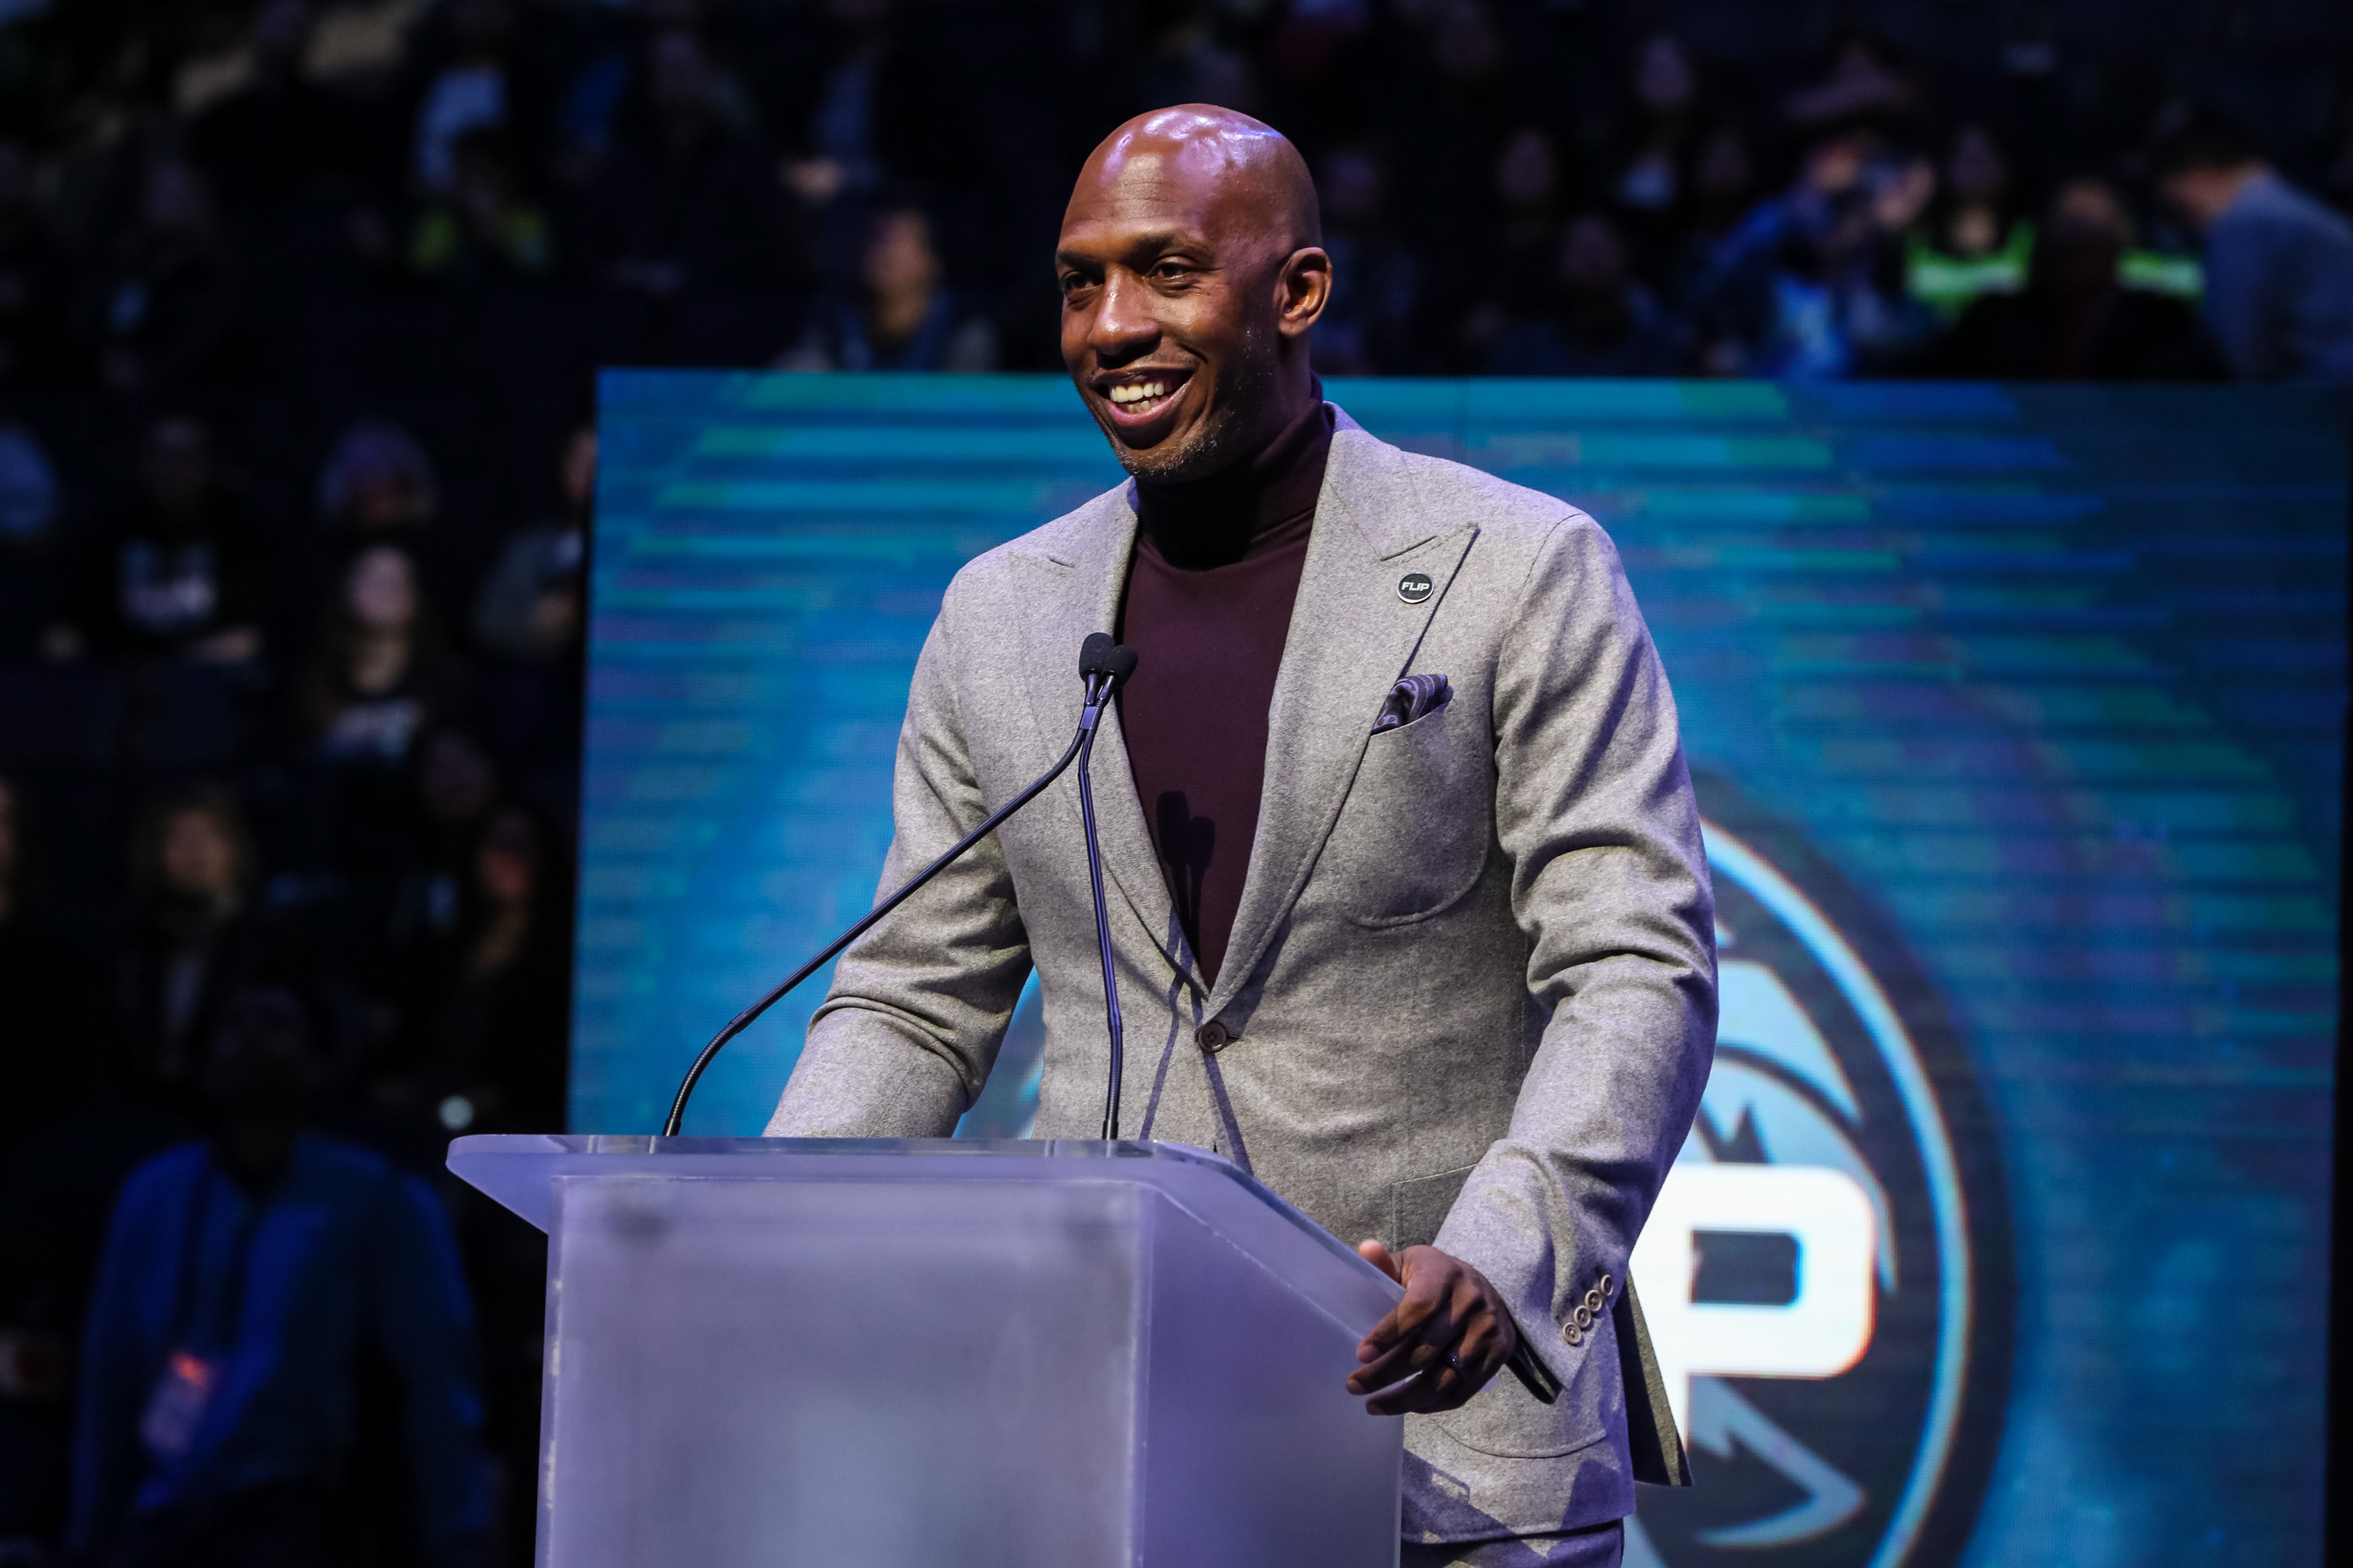 Chauncey Billups May Not Yet Be a Hall of Famer but He's the Only